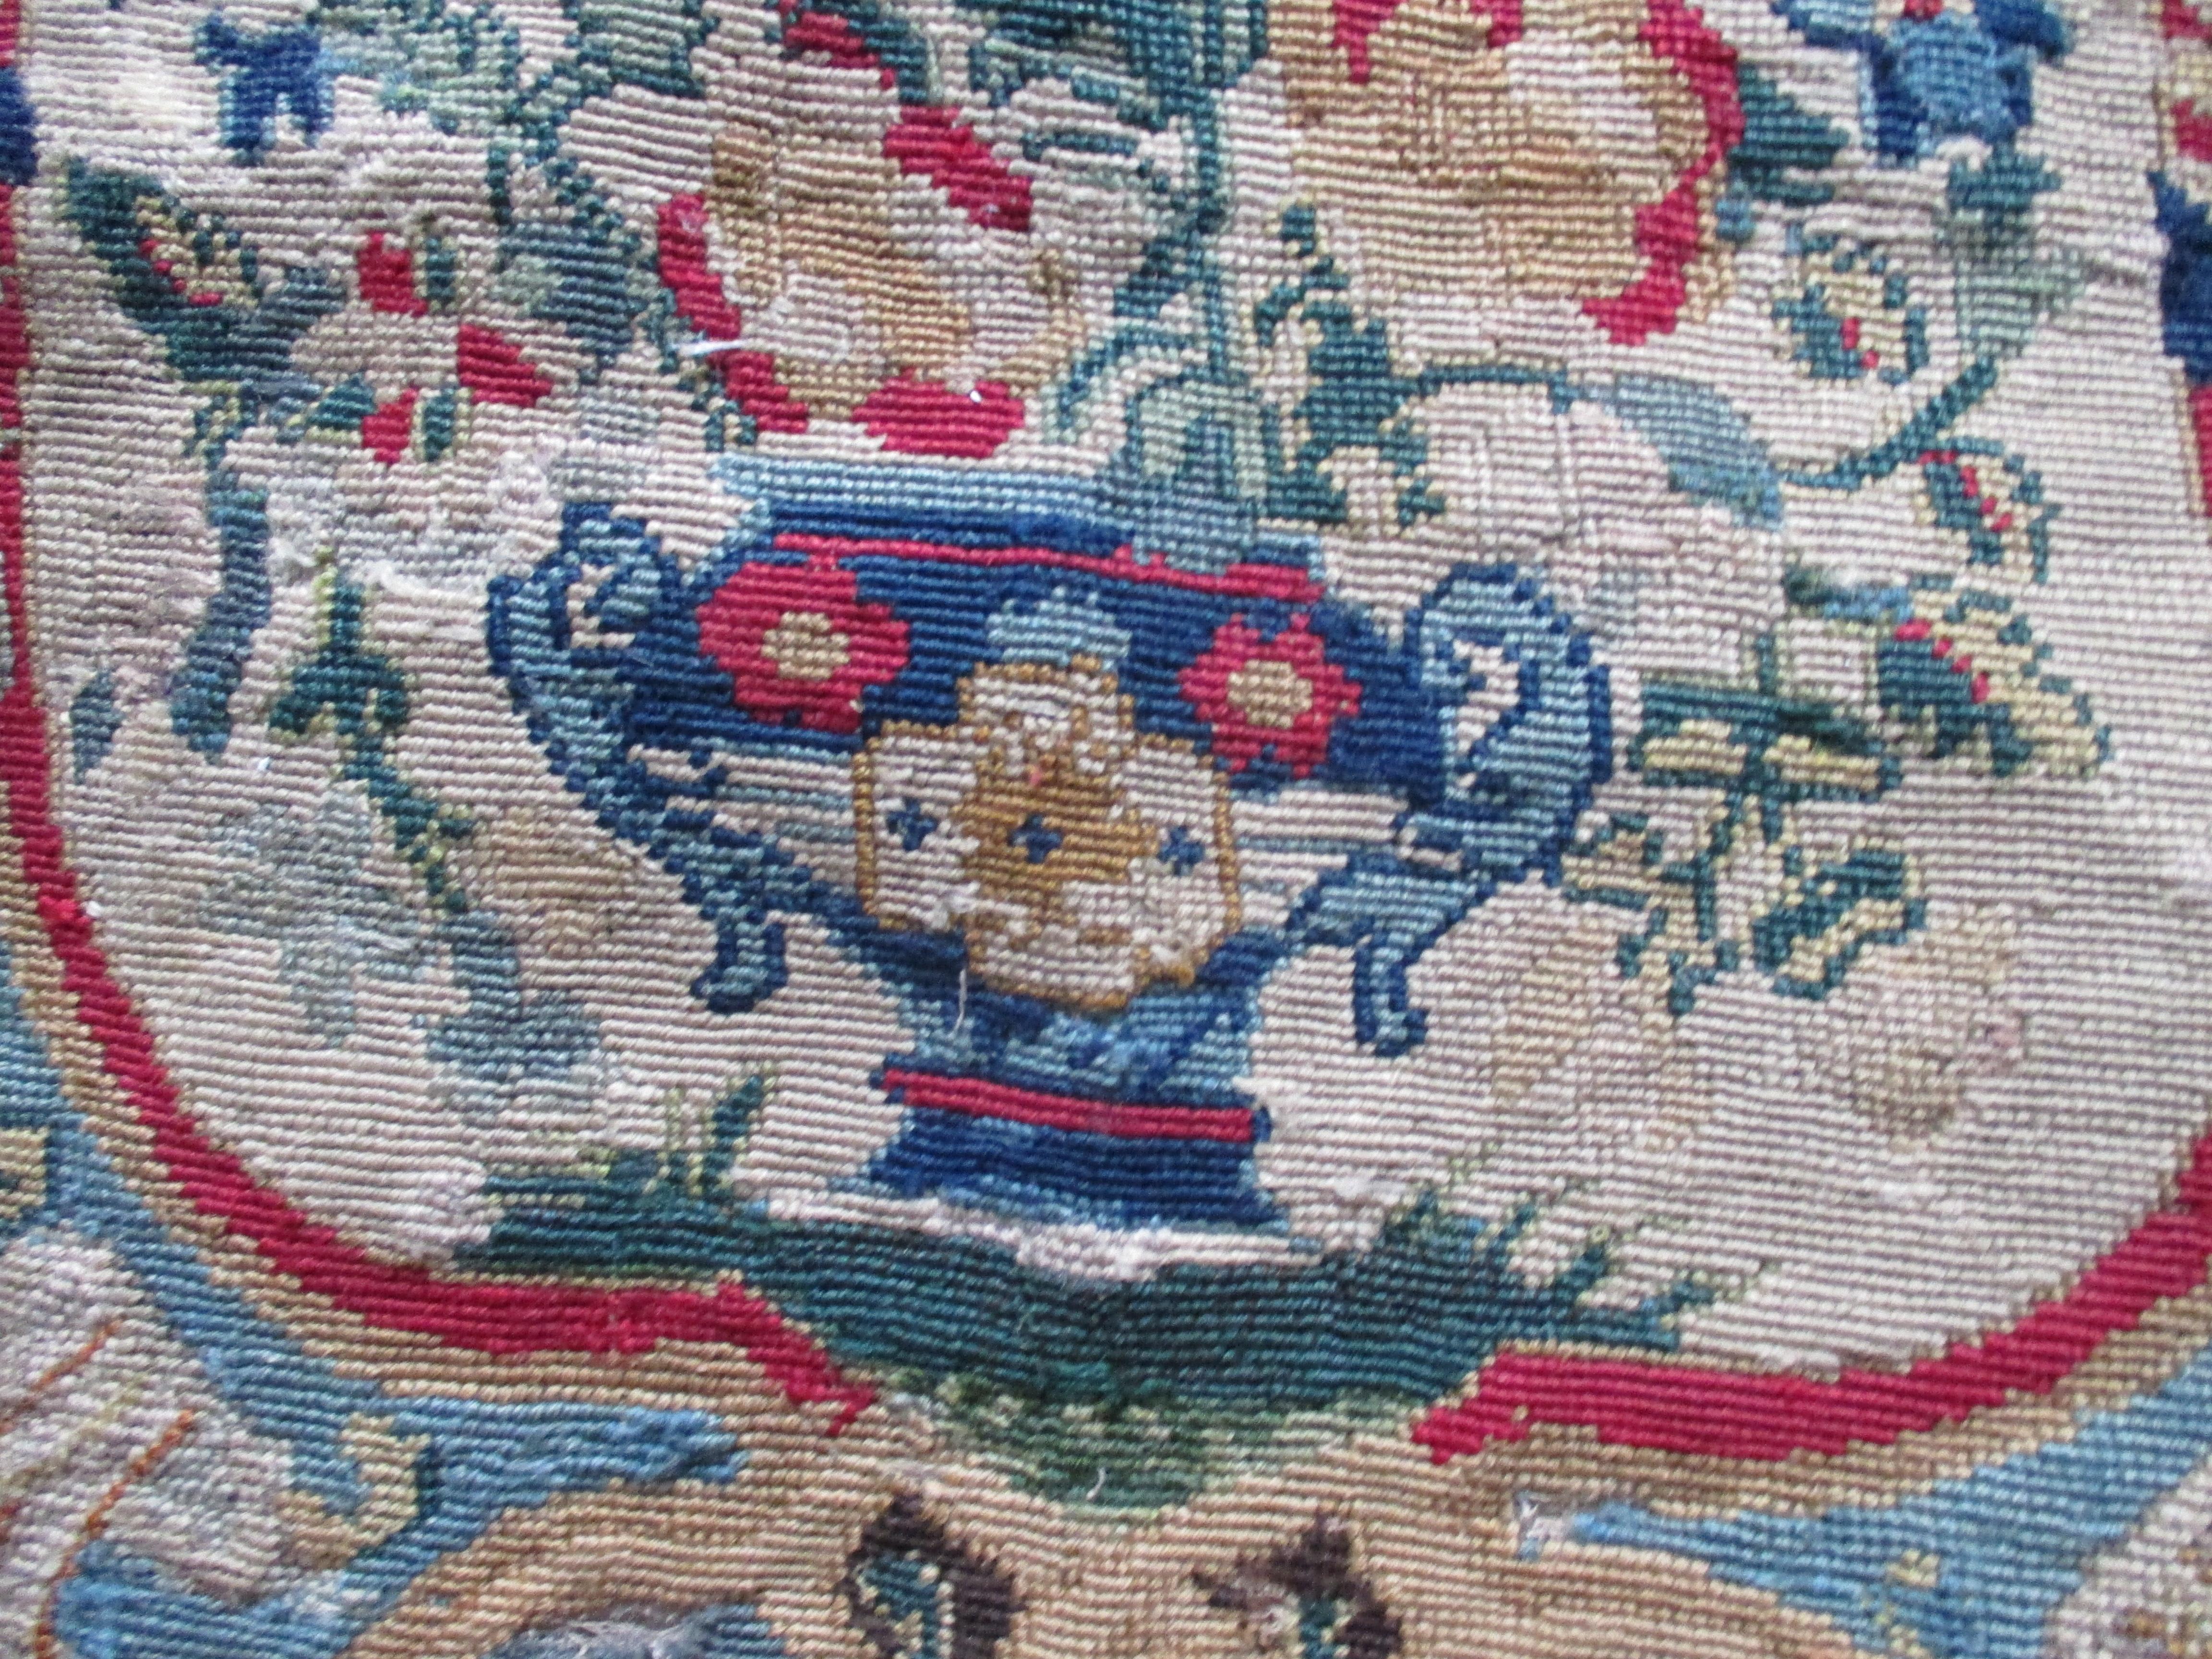 Antique red and blue floral petit point tapestry fragment with red medallion in the center.
With a red border and a bouquet of flowers on a blue vase in the center. 
 Ideal for re-upholstery or a decorative pillow.
In shades of blue, tan, red and